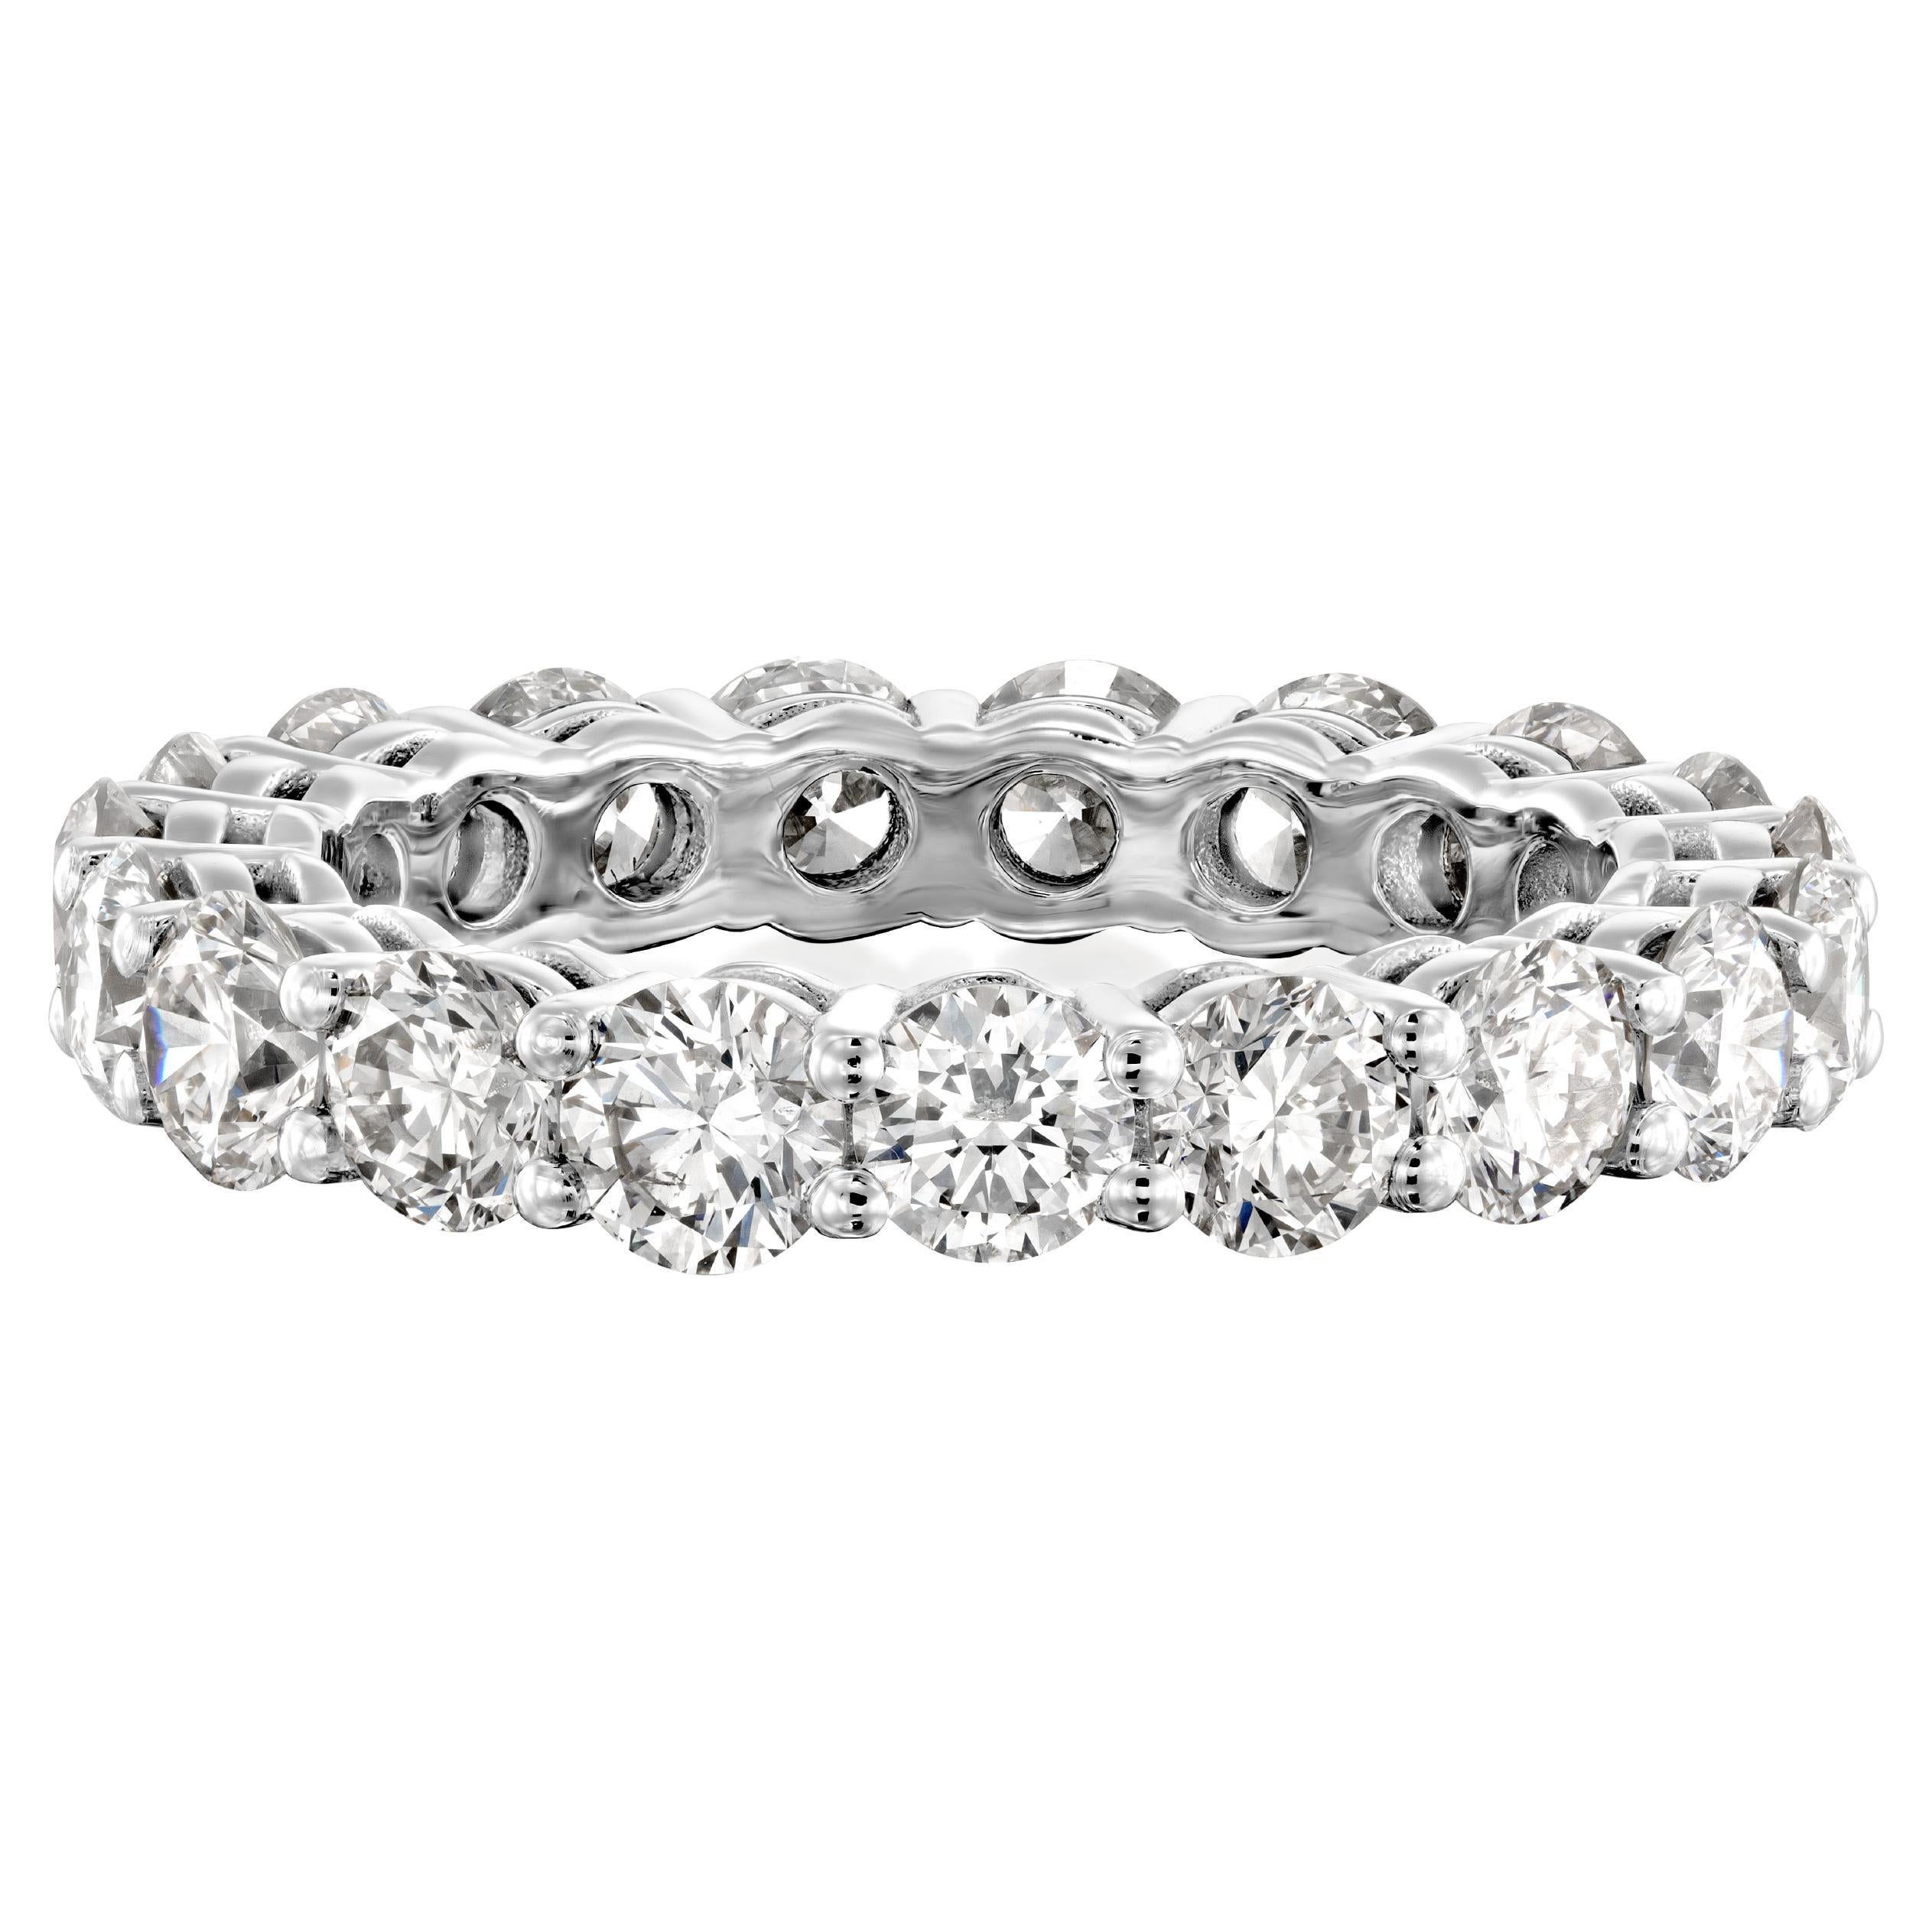 A magnificent diamond eternity band made of 14k white gold and top quality VVS1 to VS2 clarity sparkling brilliant diamonds. We only have 1 , don't miss your chance!

Center Stone:
___________
Natural Diamond
Cut: Round Brilliant Cut
Carat: 3.33